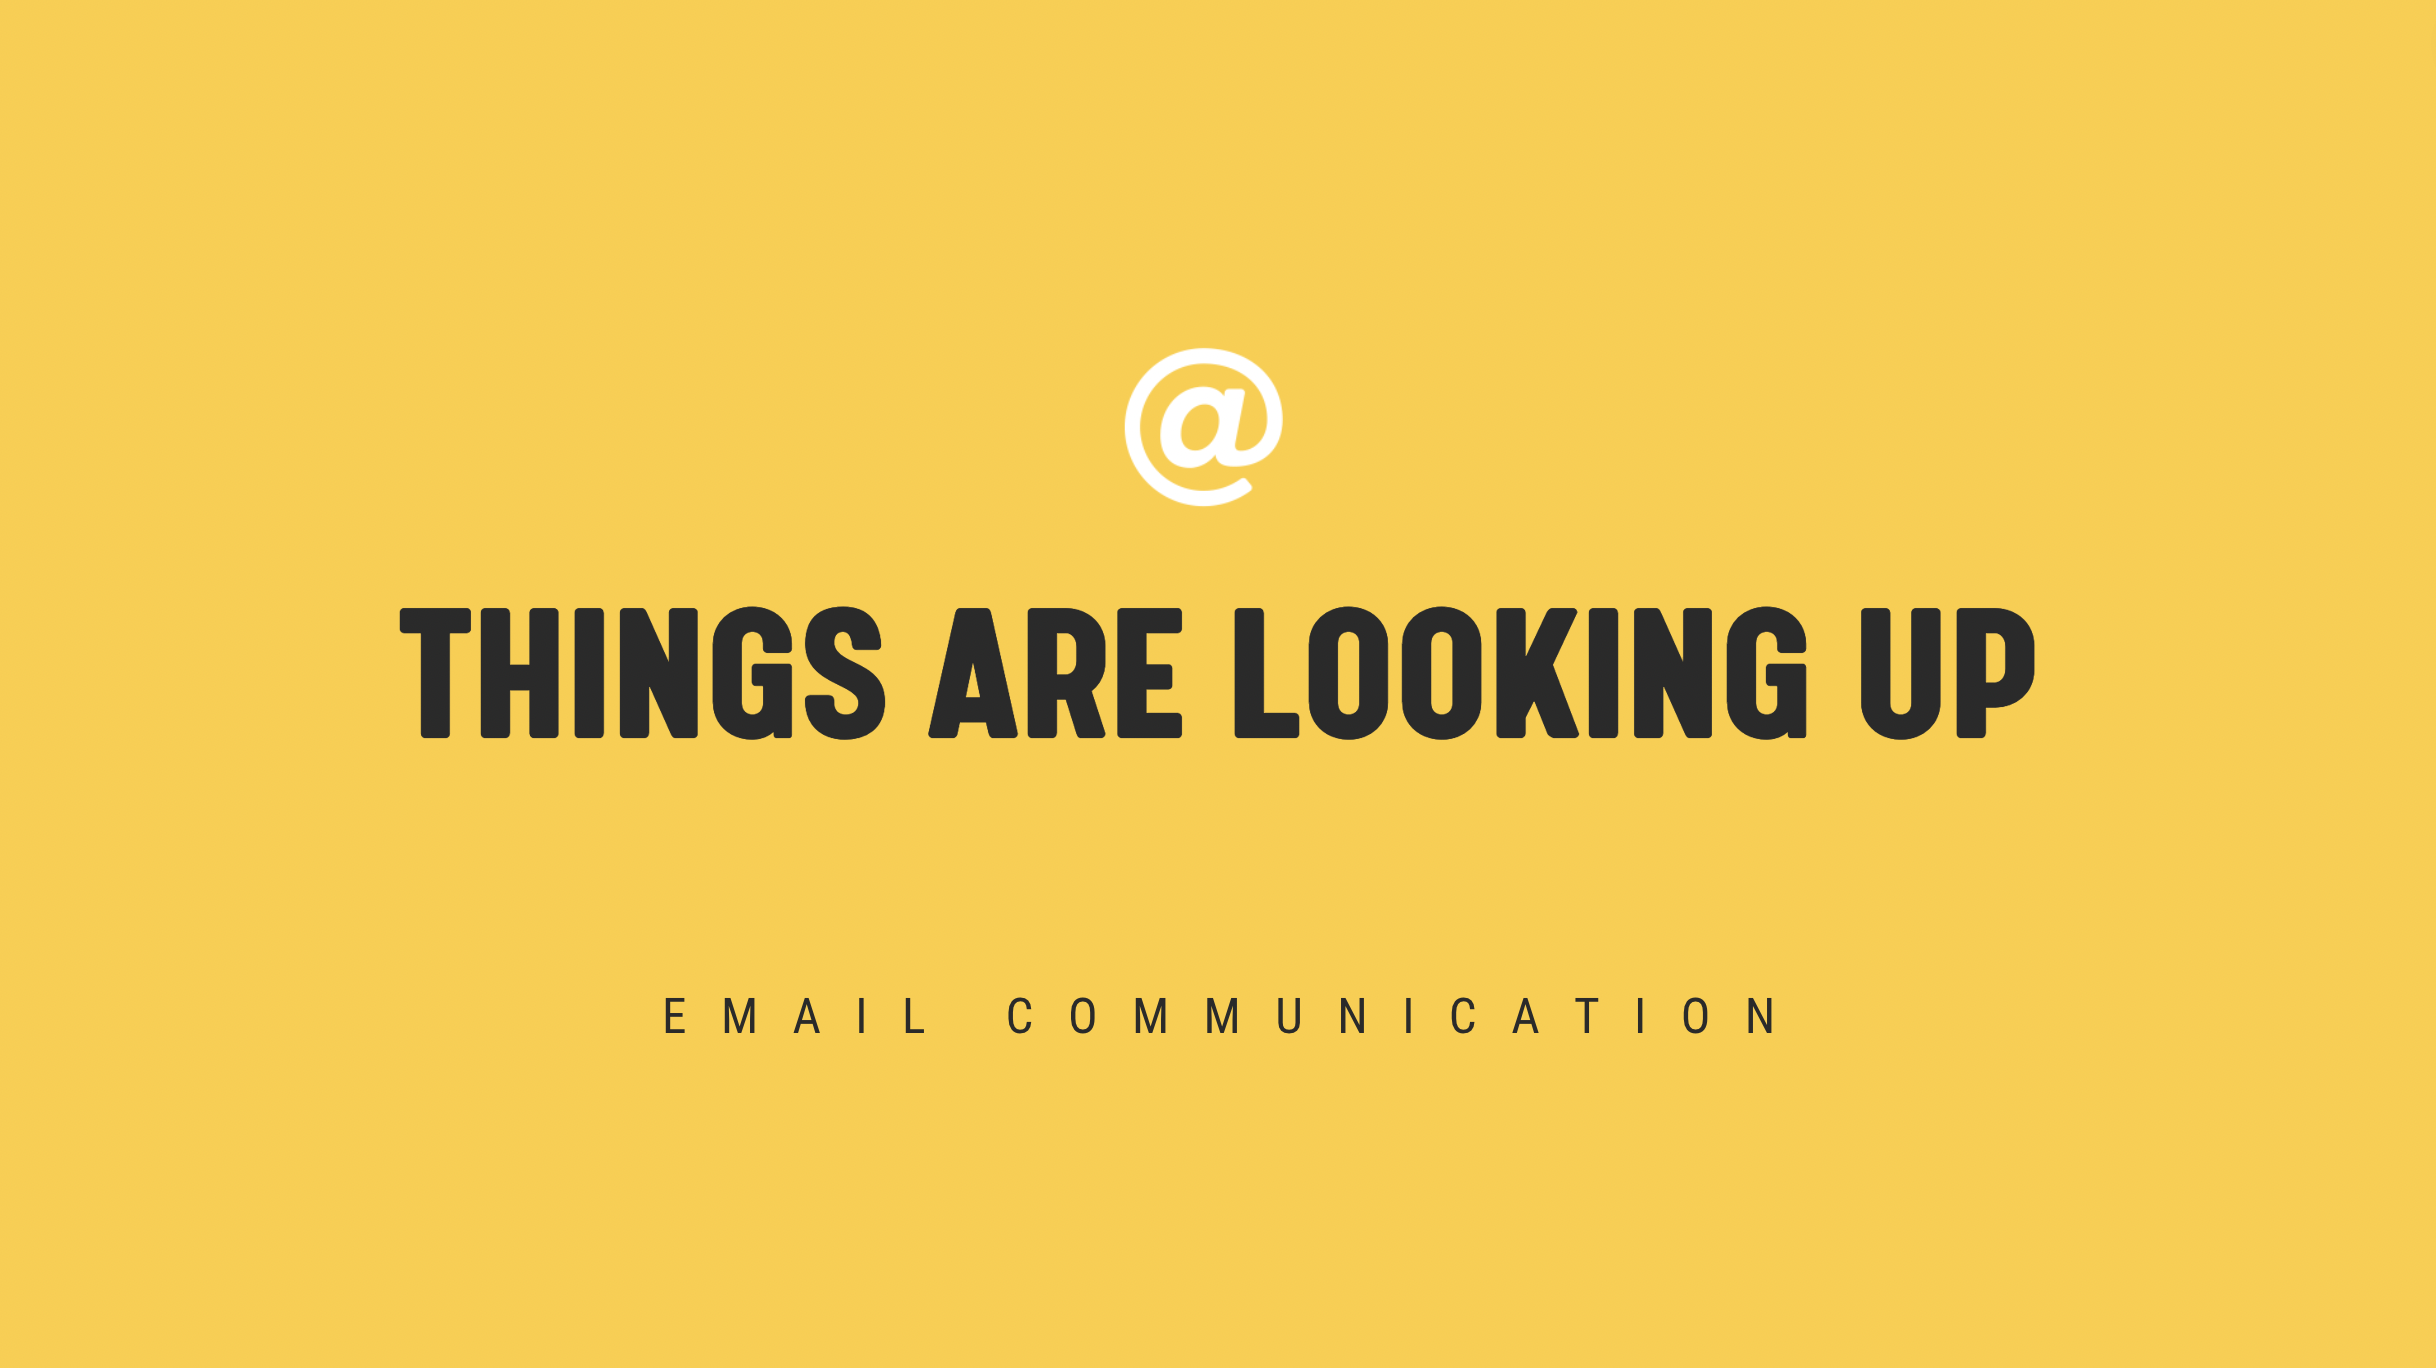 [NEW] Things Are Looking Up - Timely Email